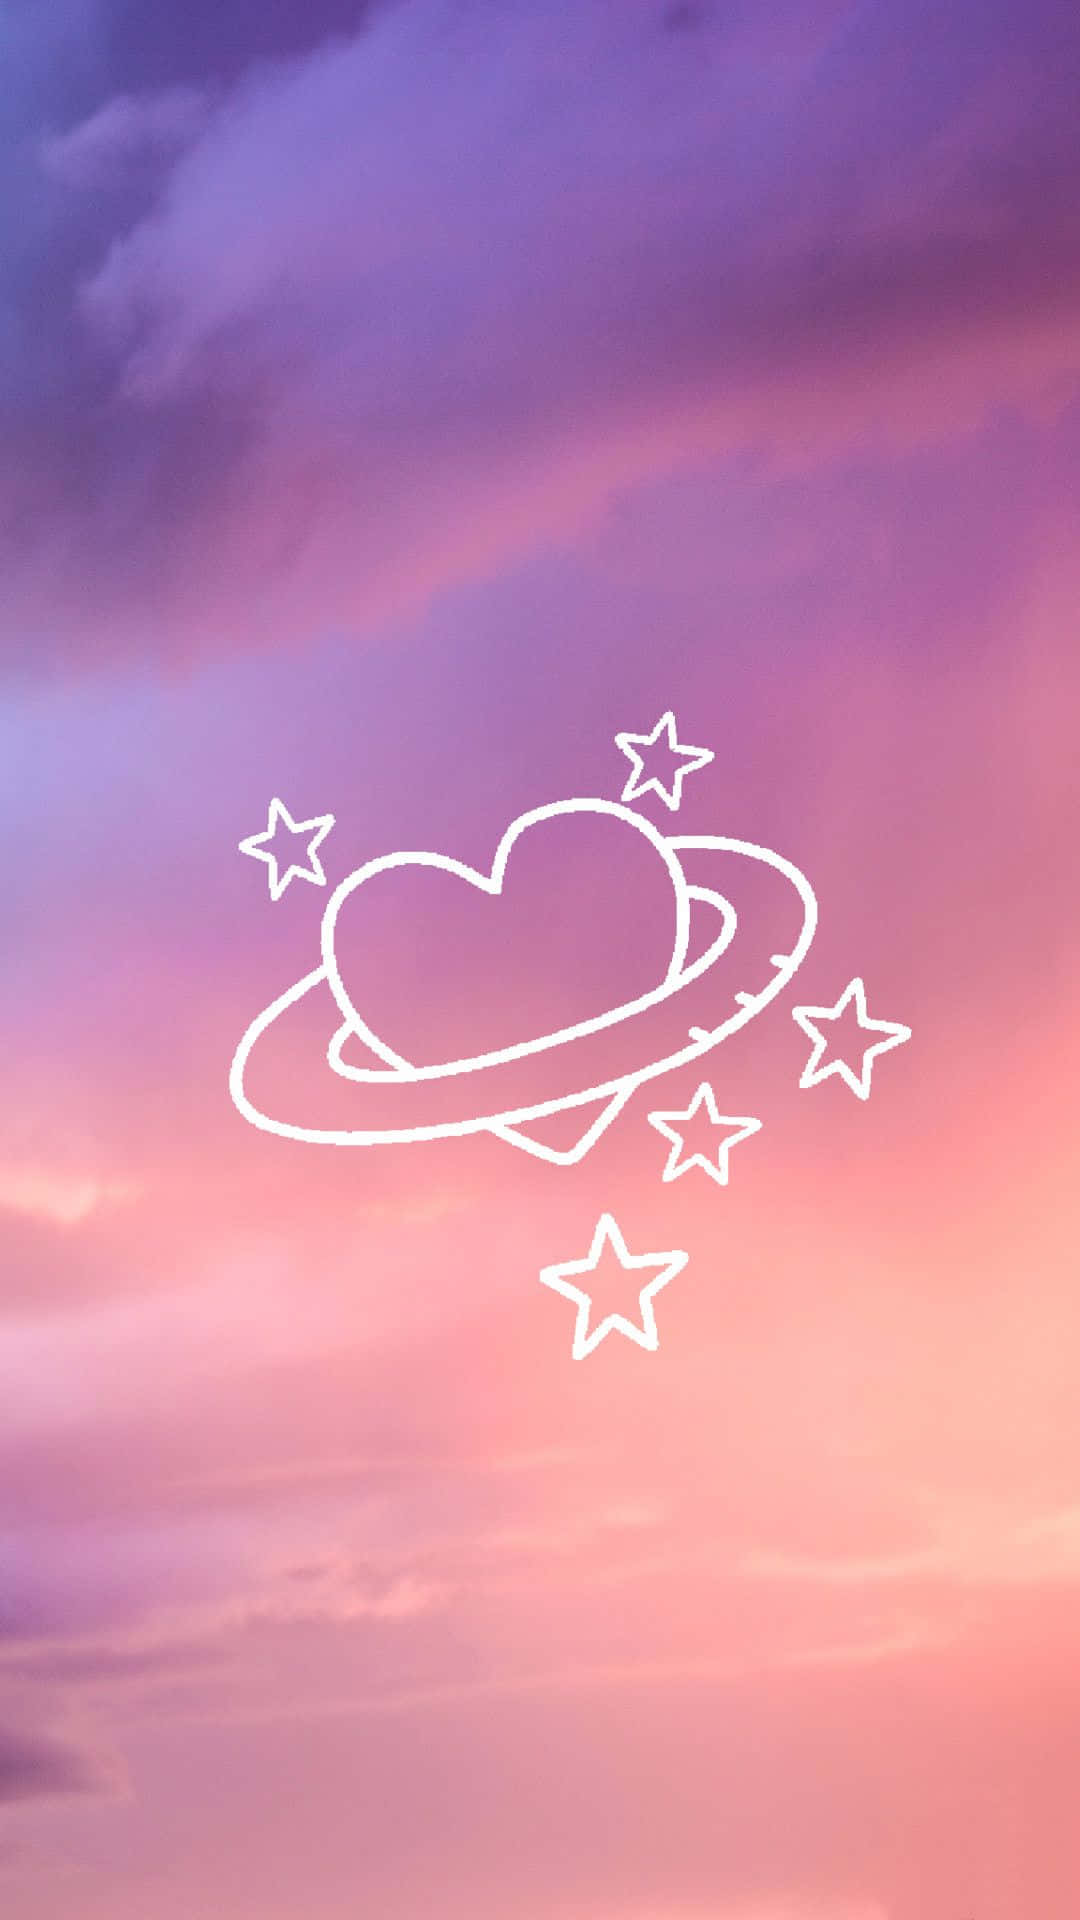 Pink Sky And Heart Girly Tumblr Background